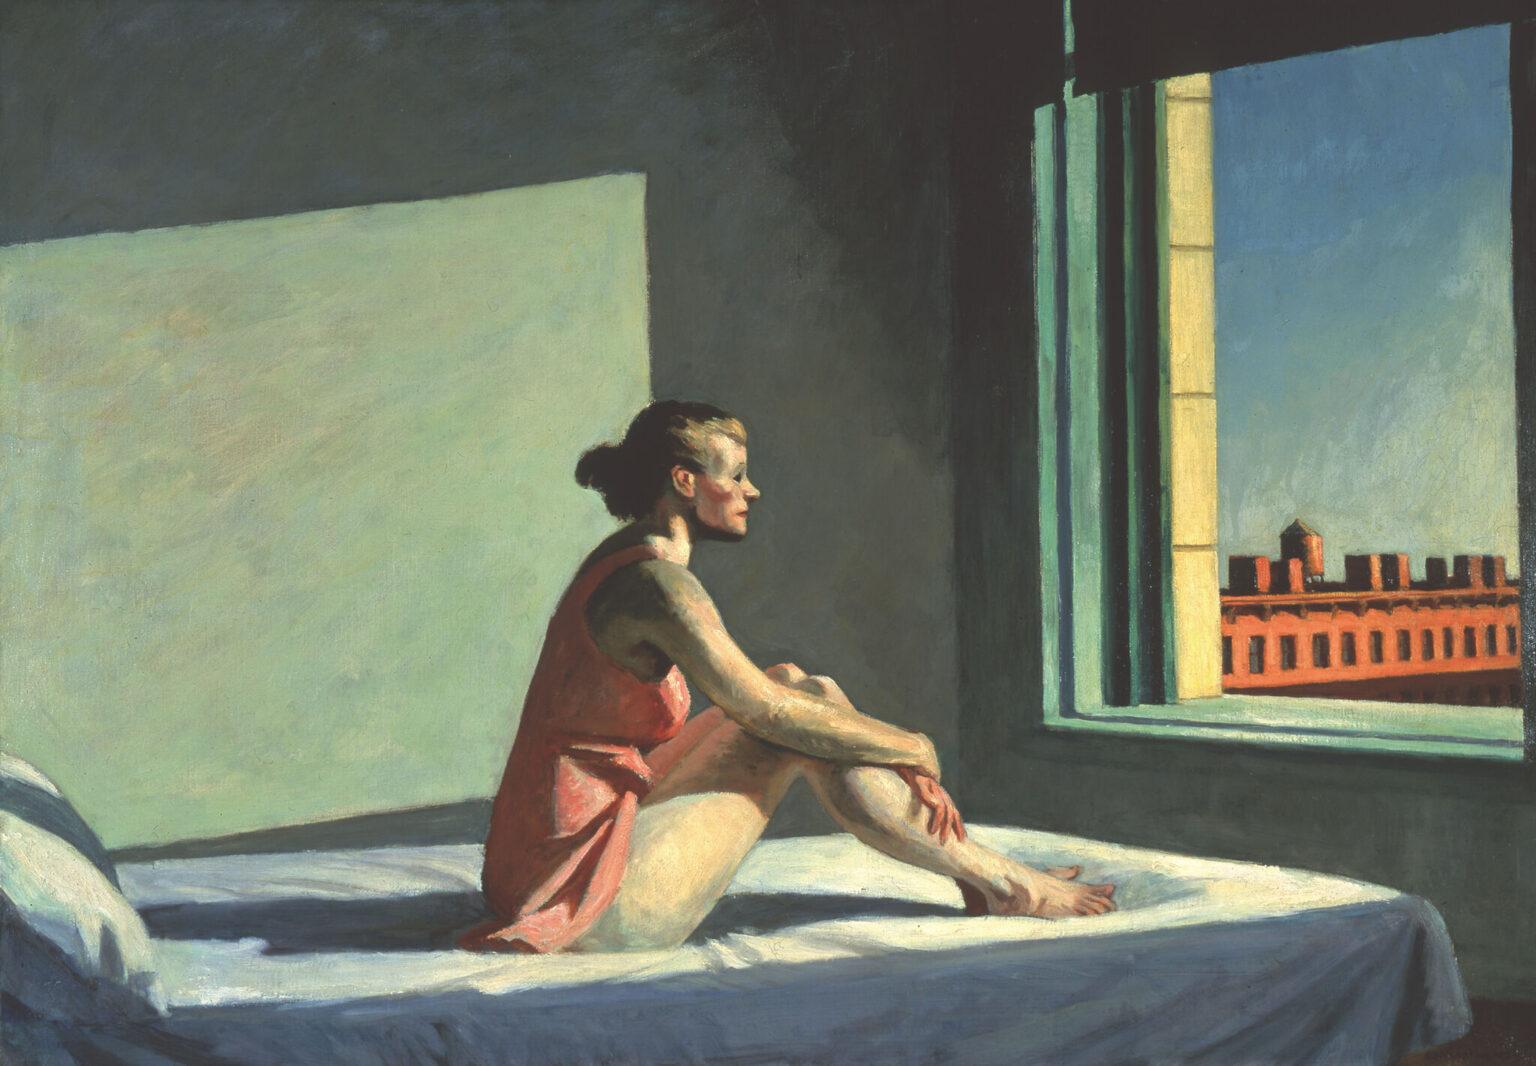 Edward Hopper’s New York at the Whitney Museum of American Art